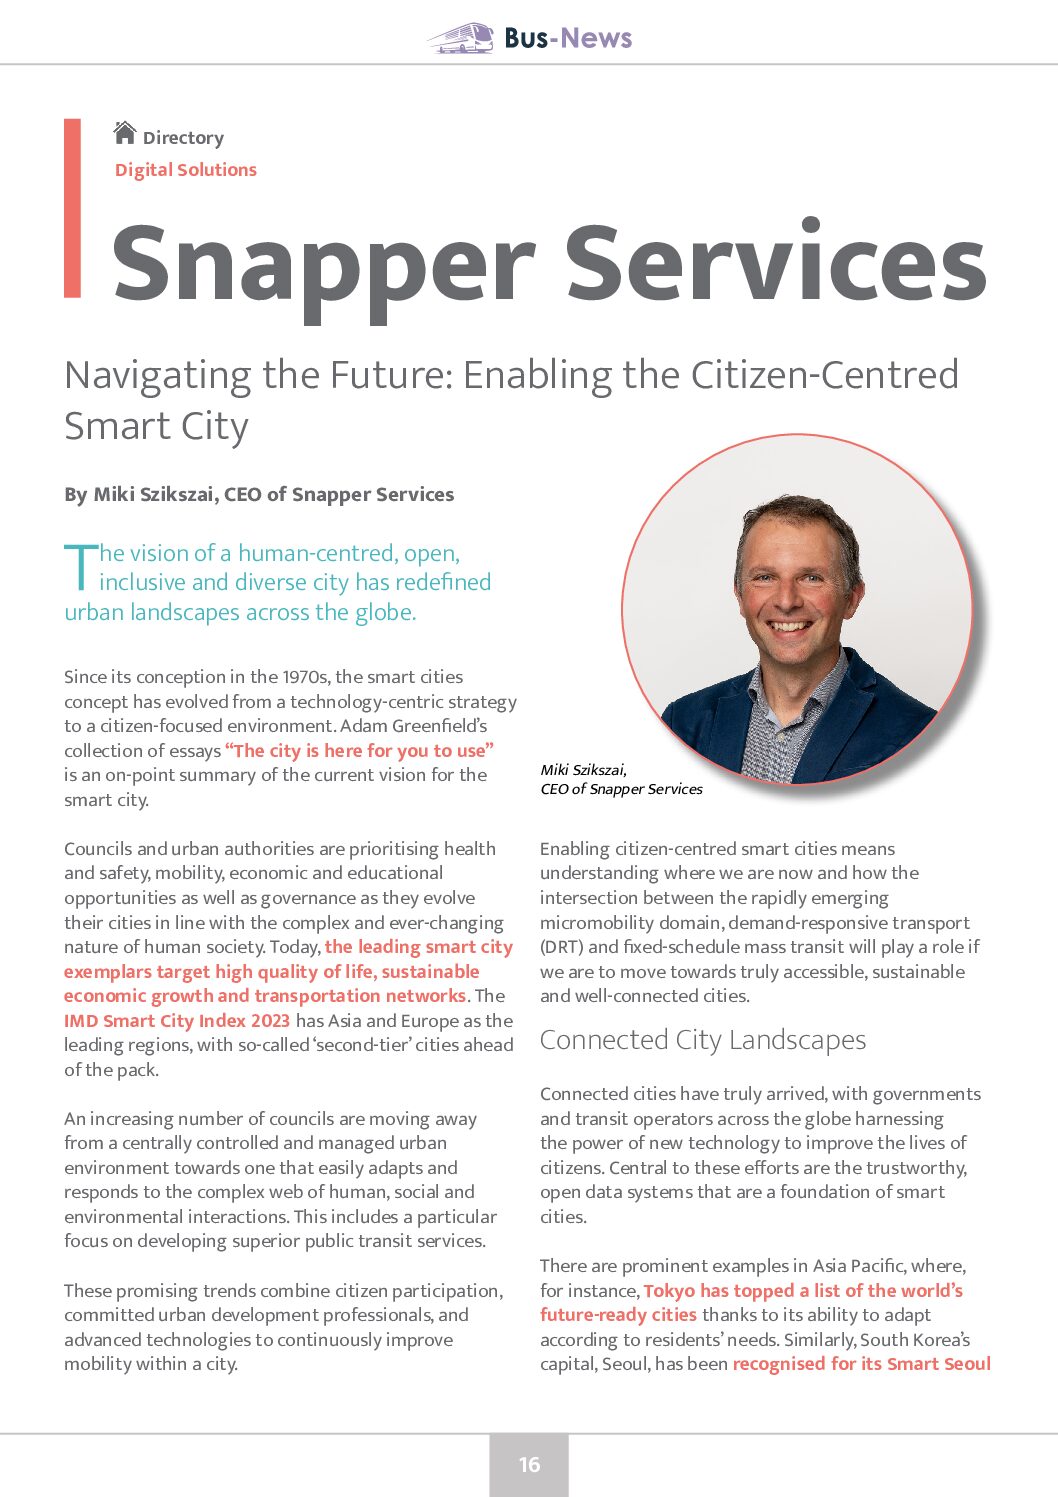 Navigating the Future: Enabling the Citizen-Centred Smart City